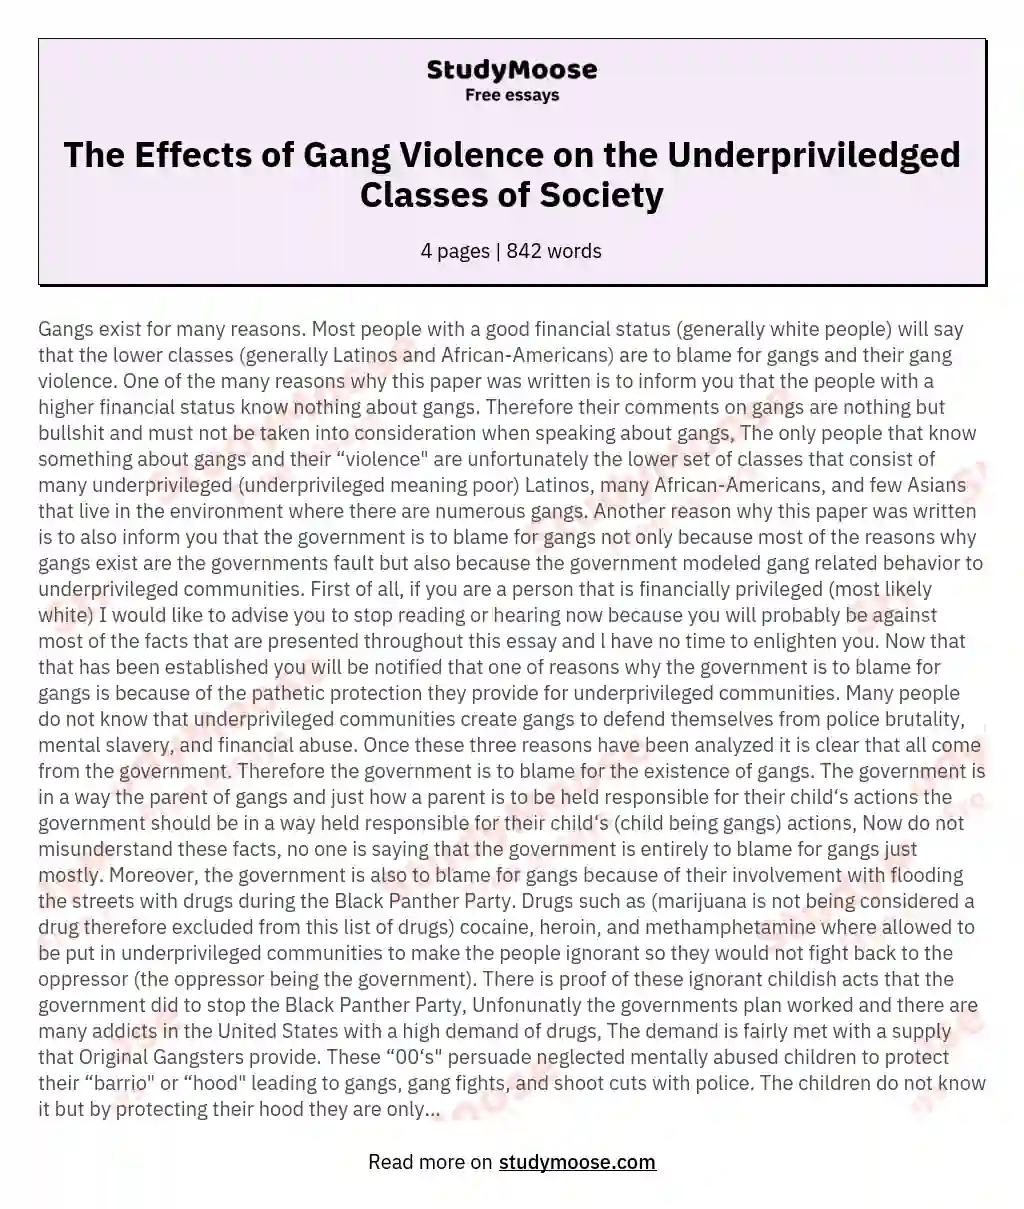 The Effects of Gang Violence on the Underpriviledged Classes of Society essay